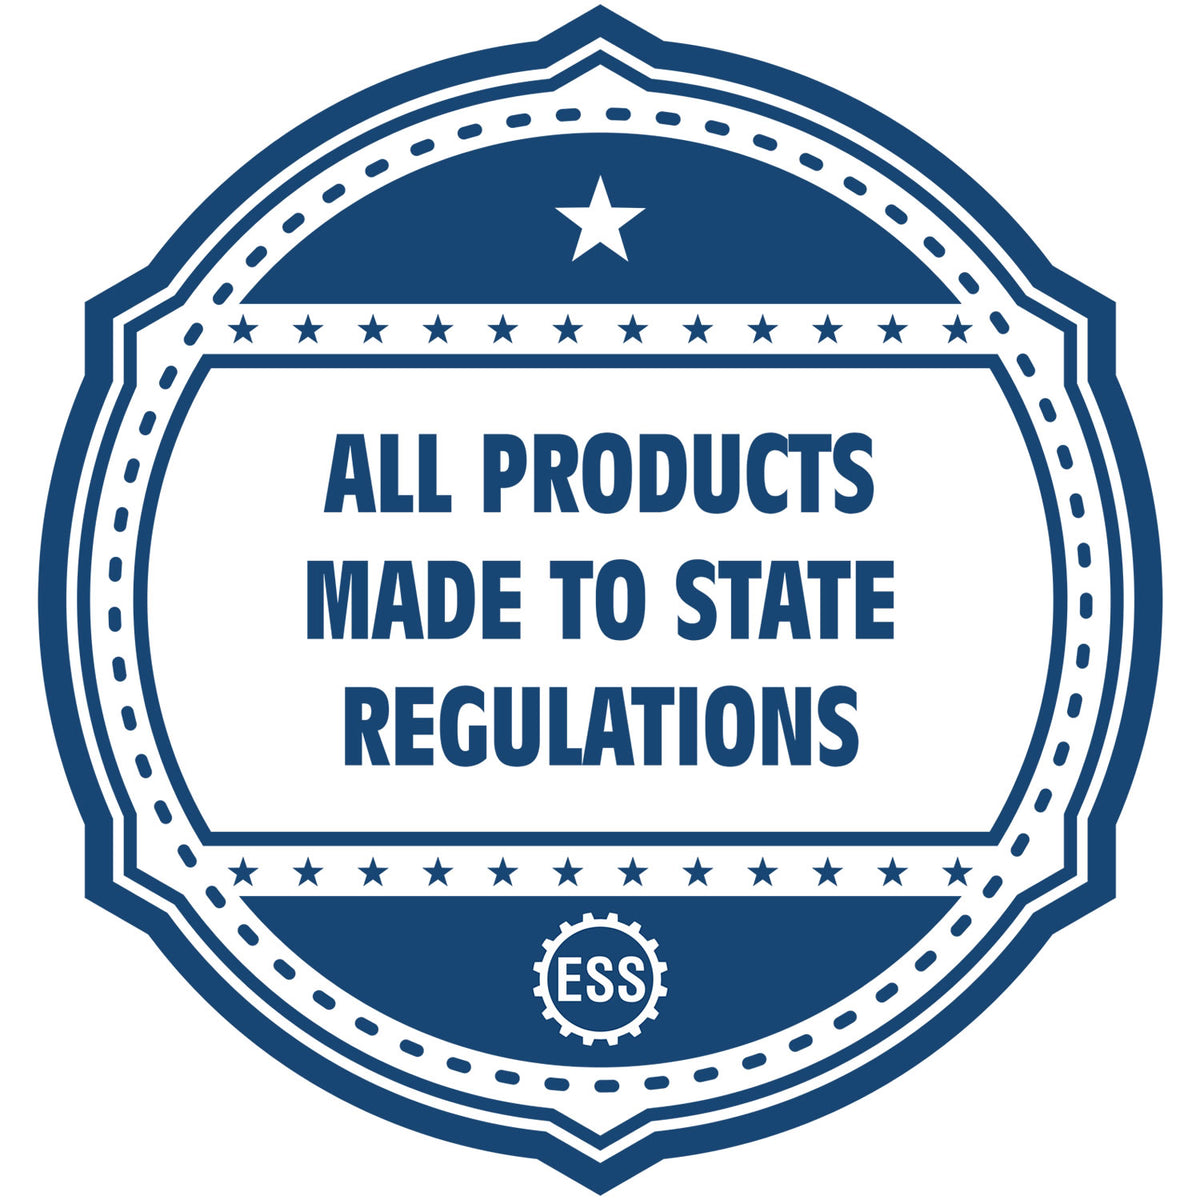 A blue icon or badge for the Hybrid Georgia Architect Seal showing that this product is made in compliance with state regulations.